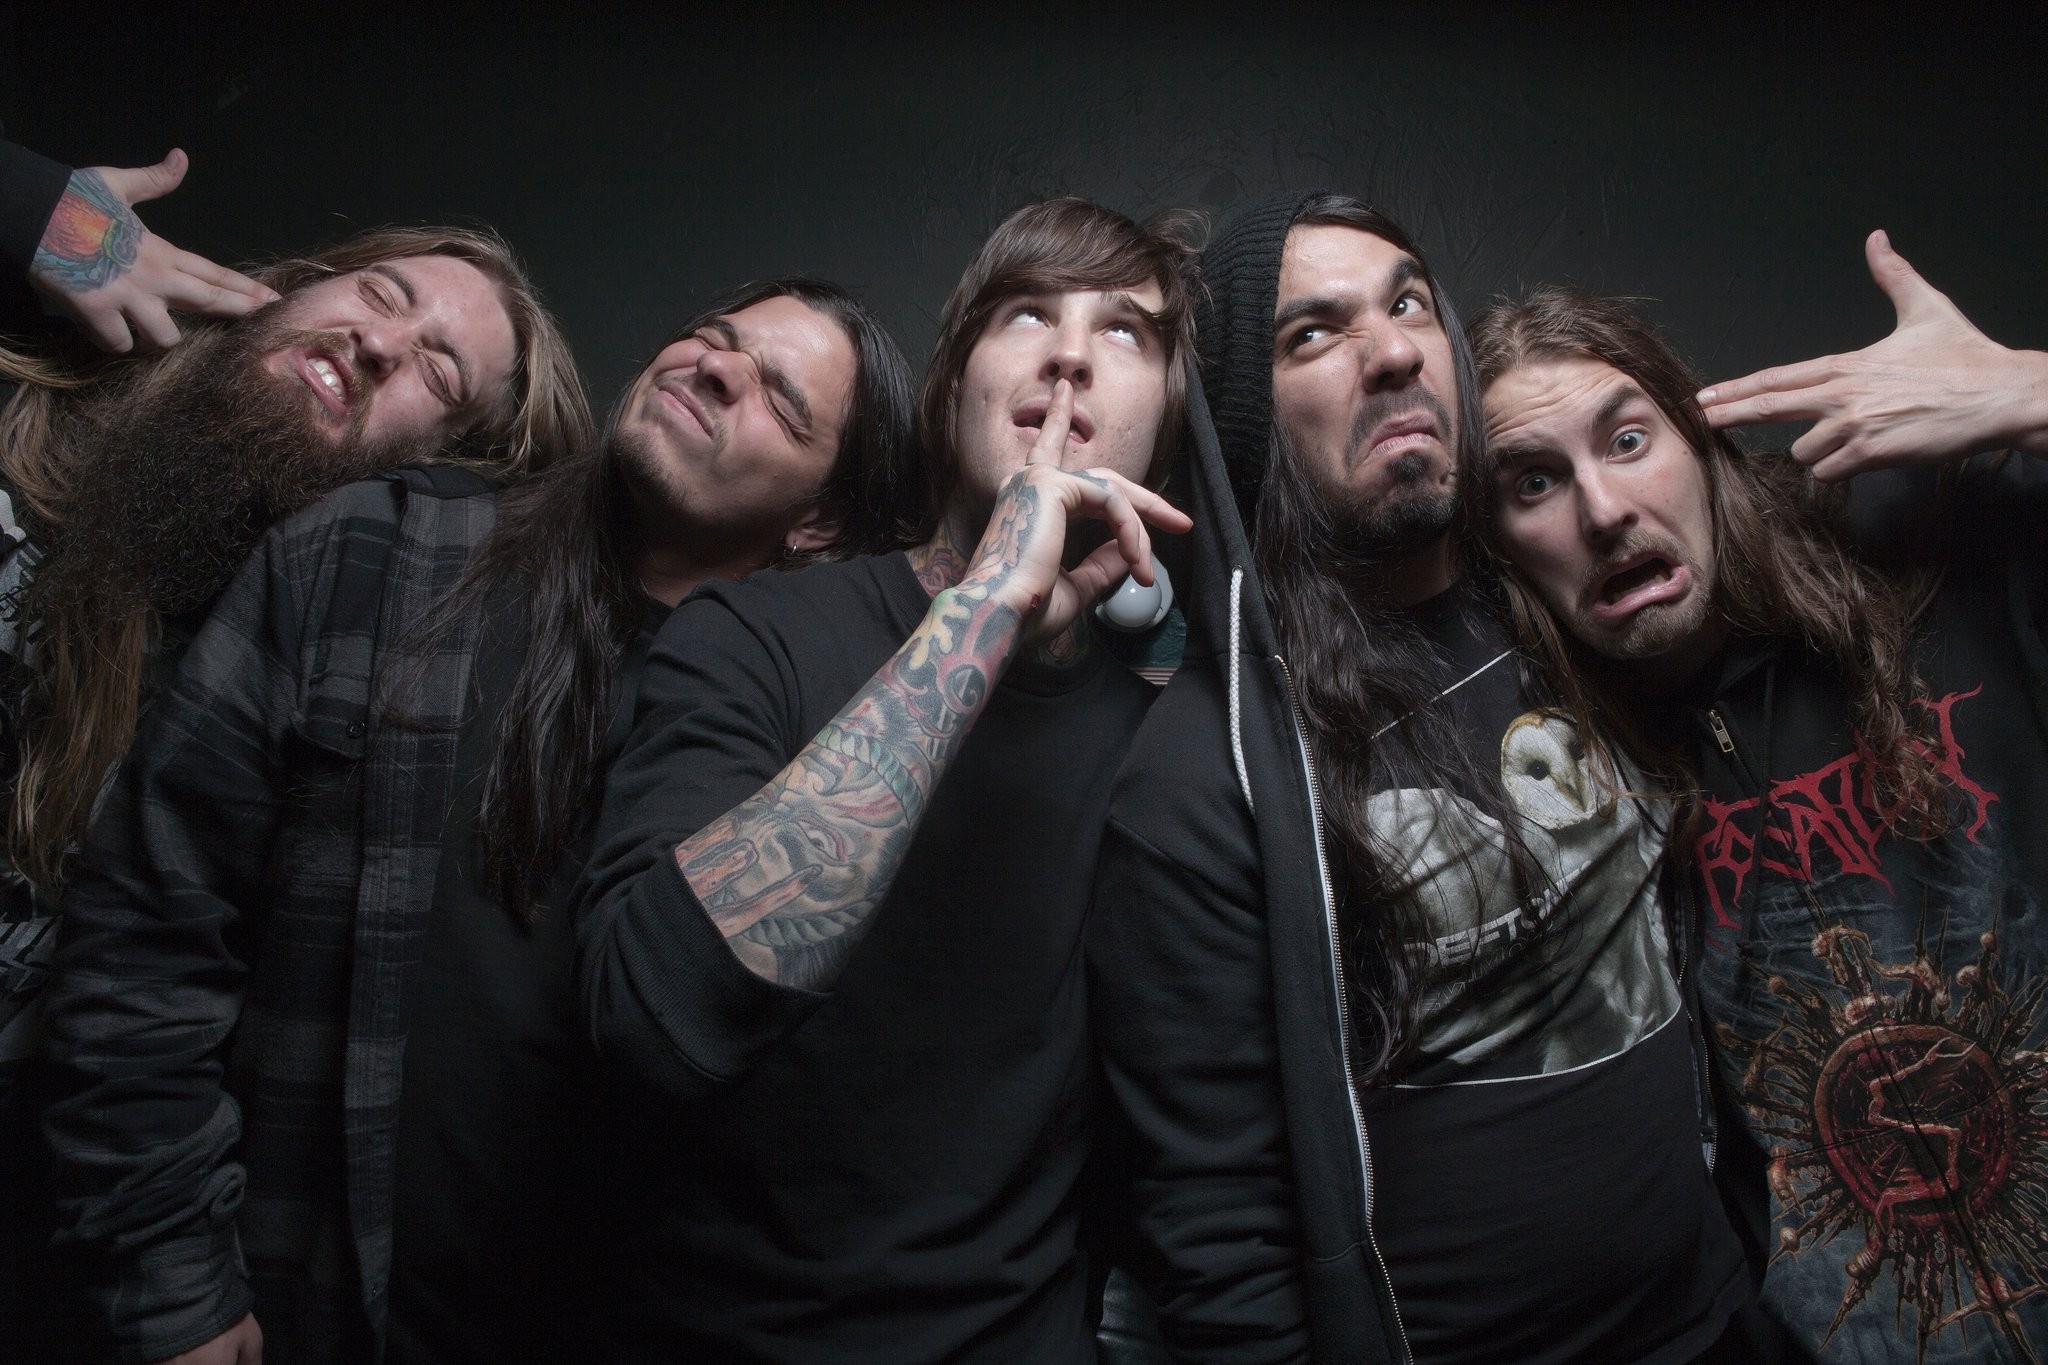 People 2048x1365 deathcore Suicide Silence Mitch Lucker band music men group of men inked men men indoors suicide